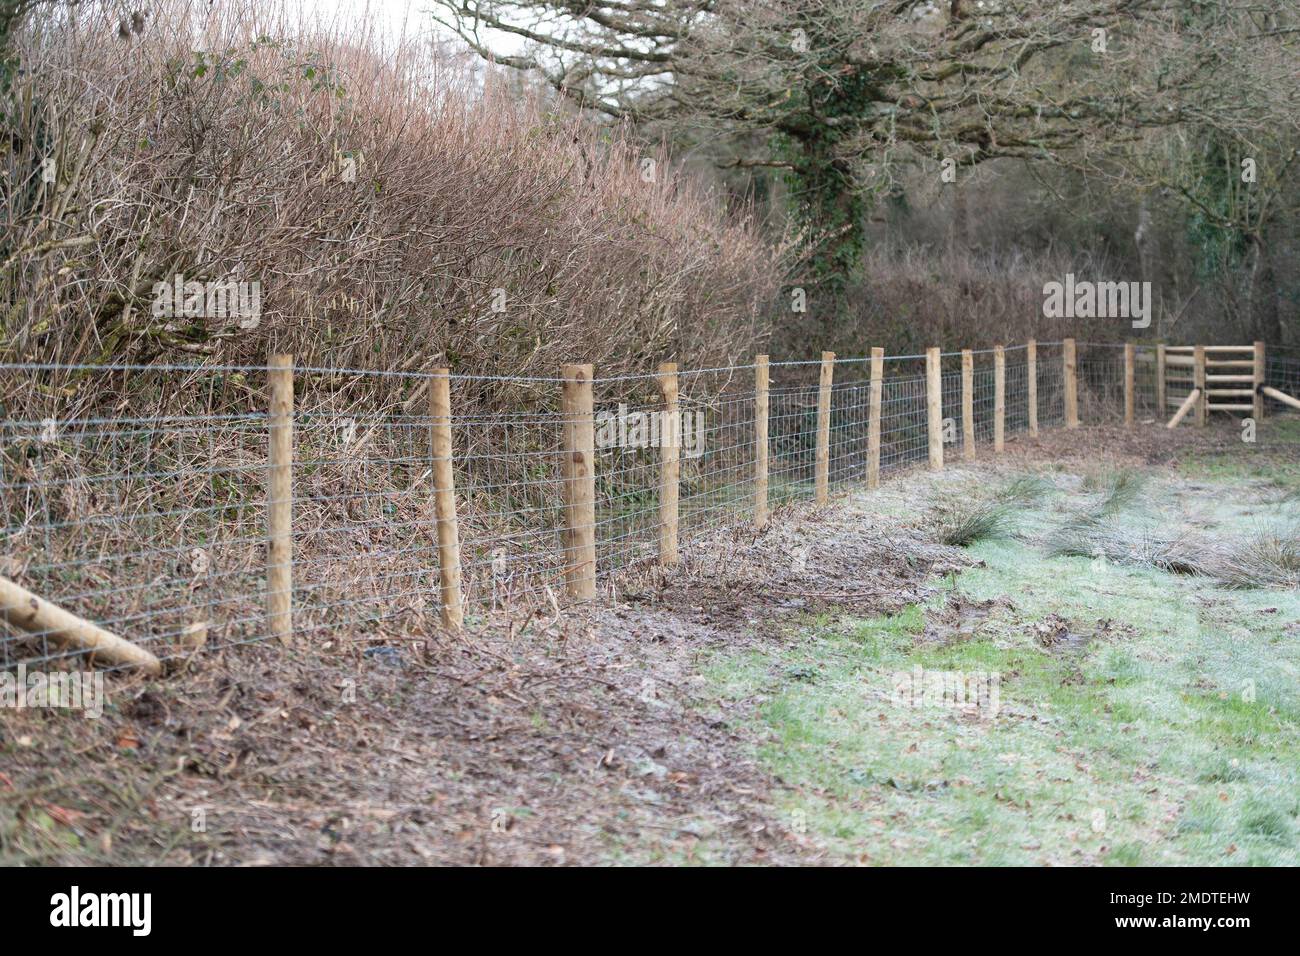 new fencing in a field Stock Photo